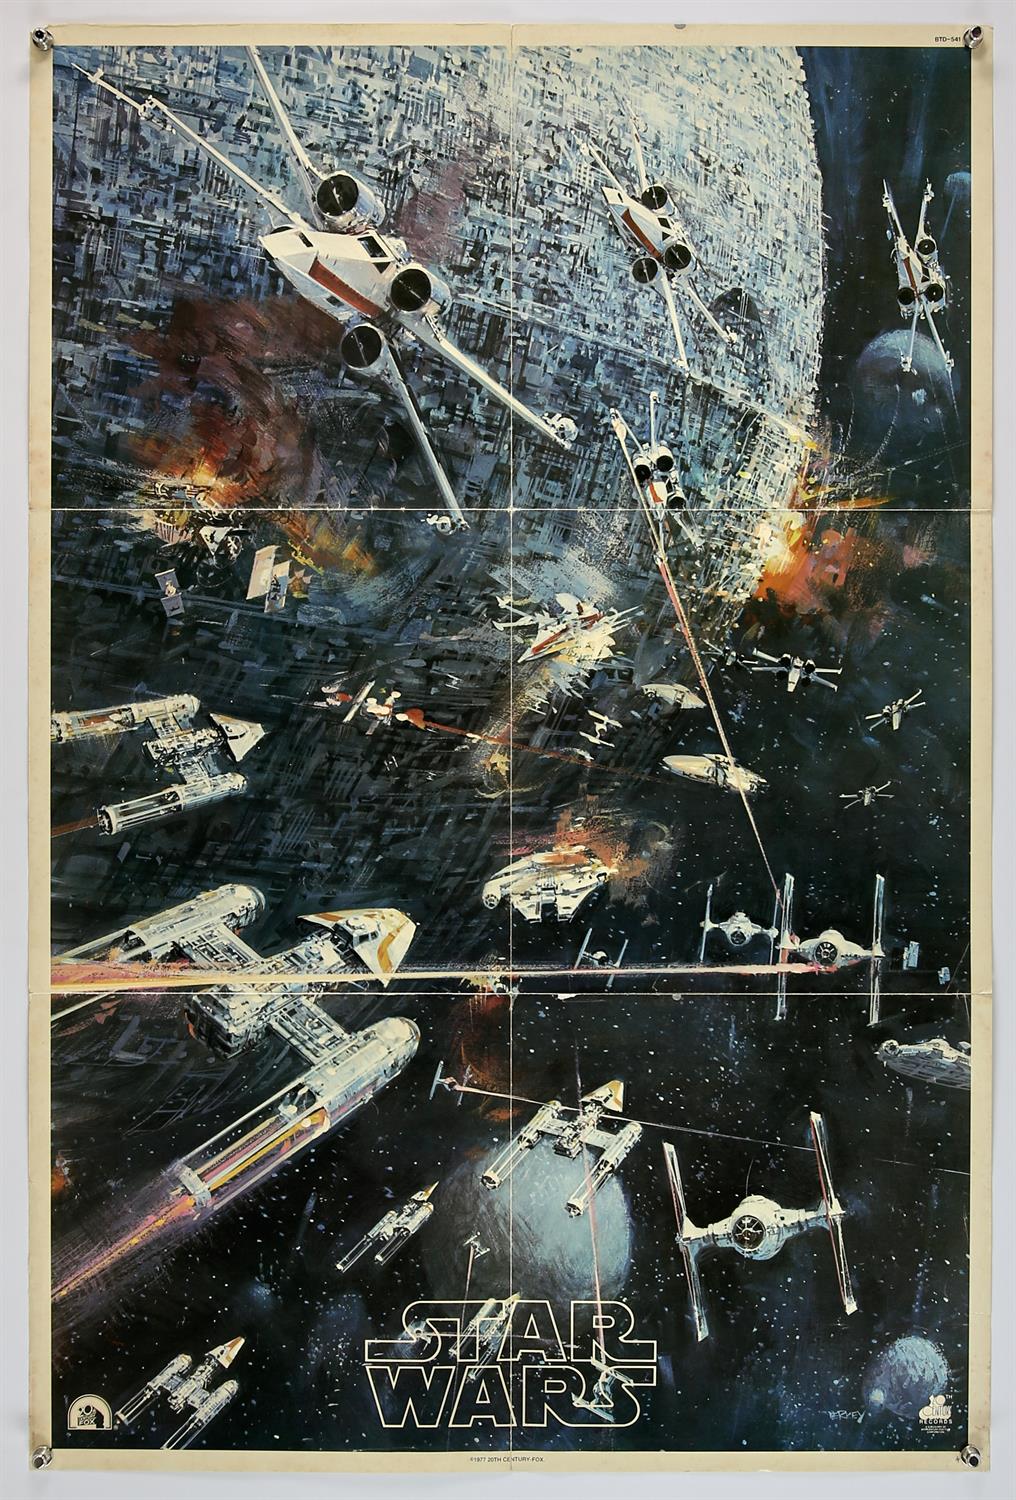 Star Wars (1977), US, soundtrack insert, 33 x 22 inches, folded, 20th Century Records Director